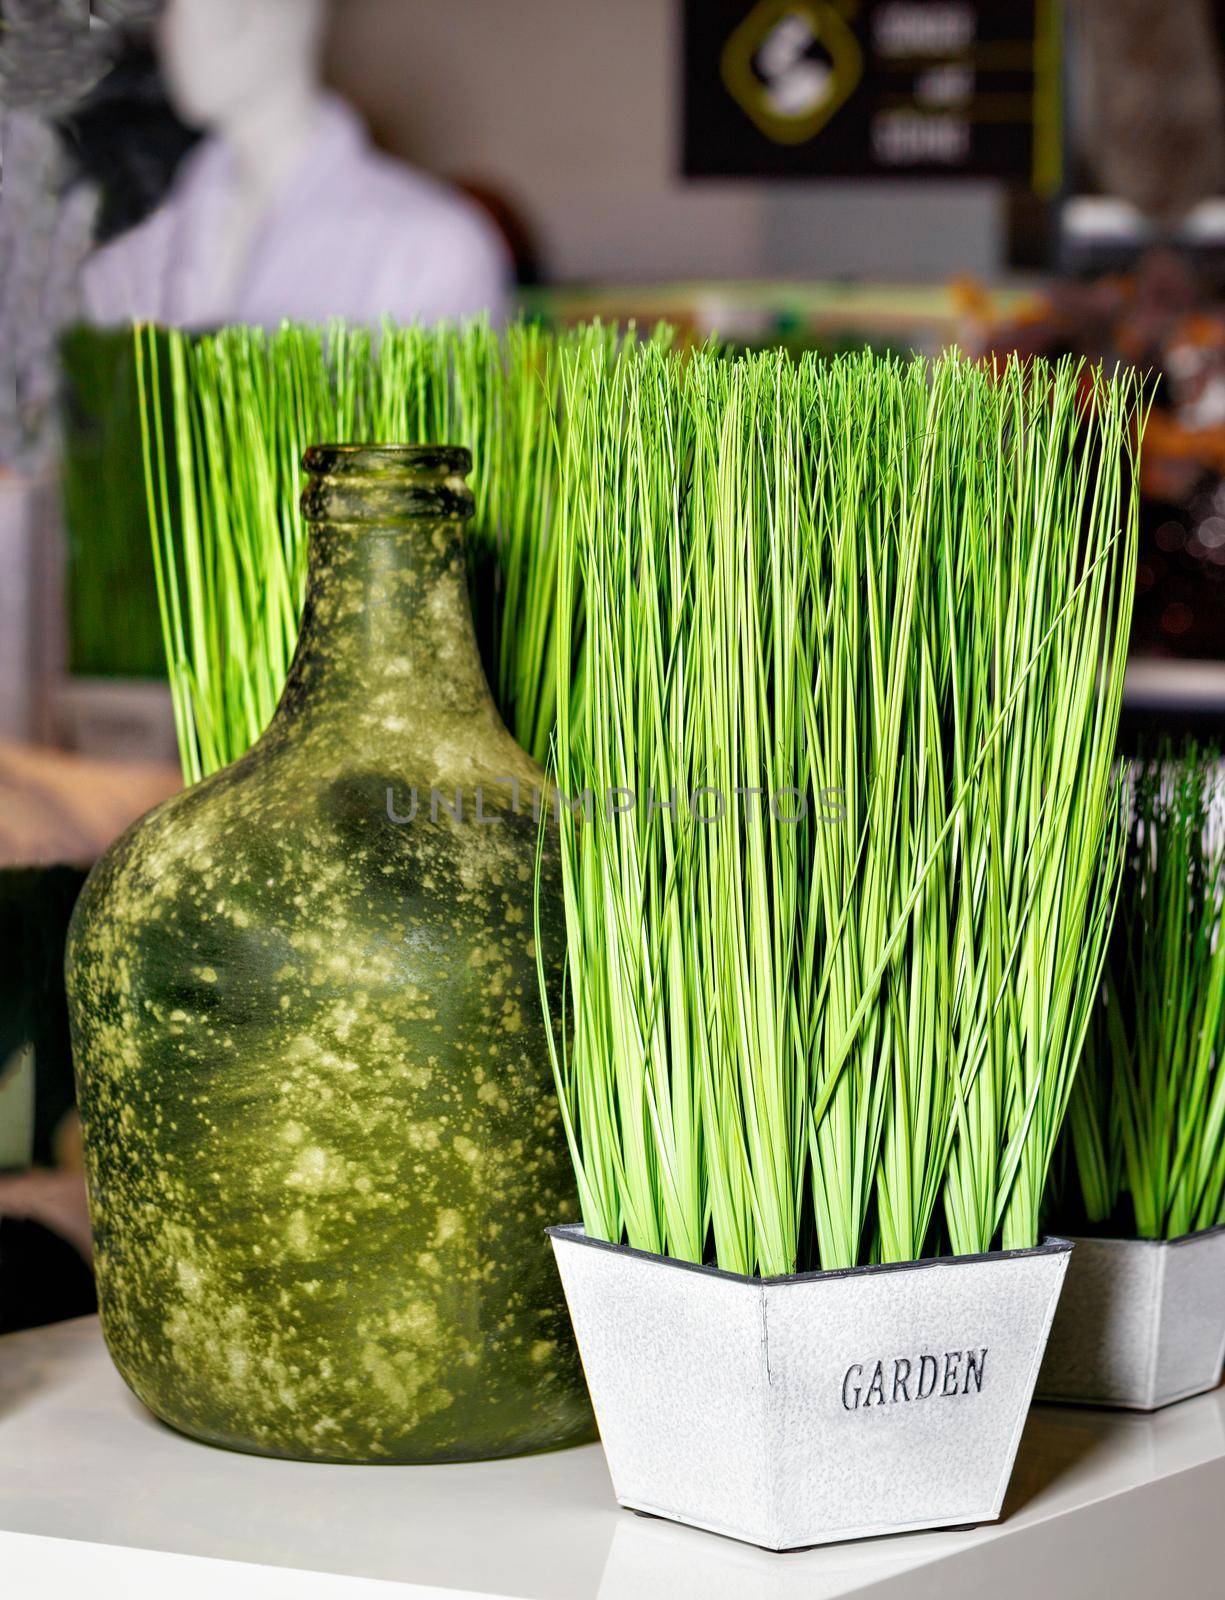 Green grass in a white pot and an old bottle as part of the restaurant's interior decoration. by Sergii